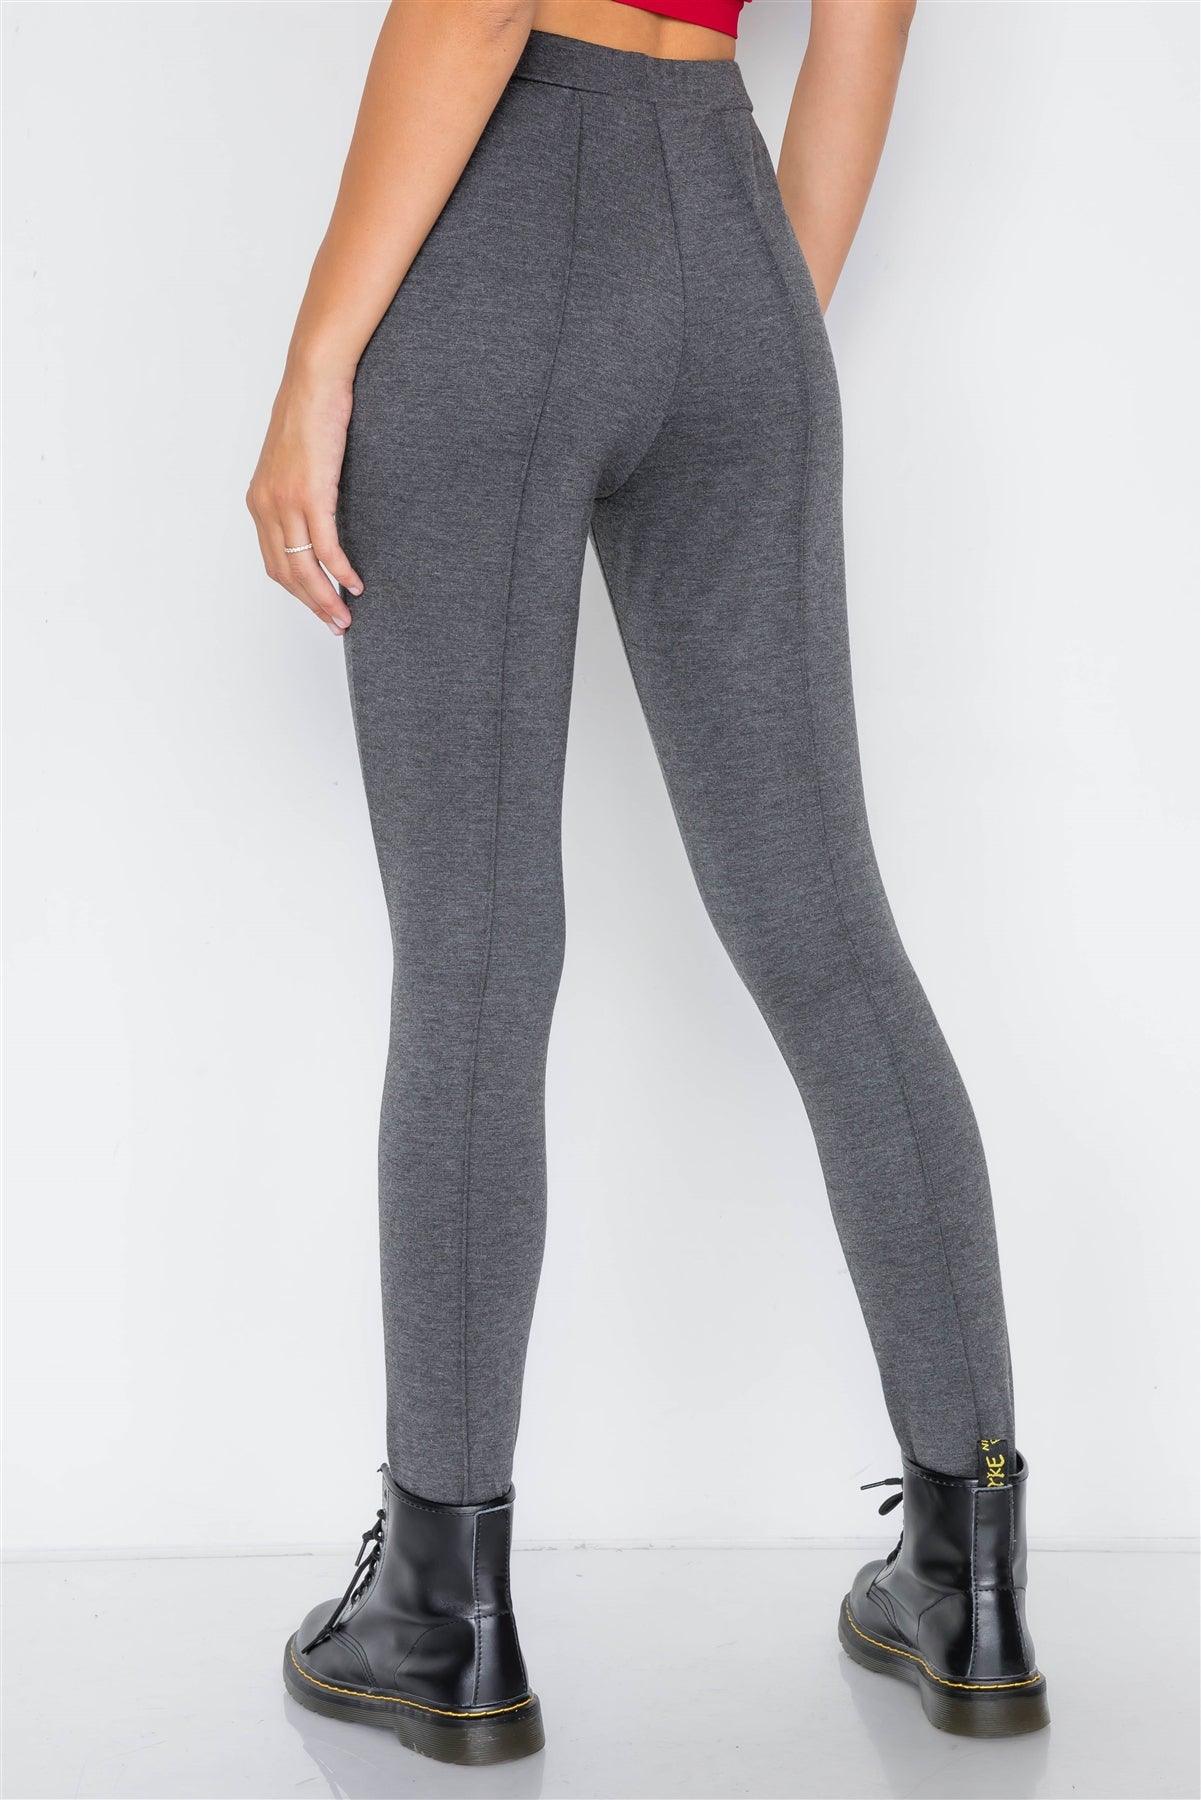 Heather Charcoal Thick Knit Leggings Pant